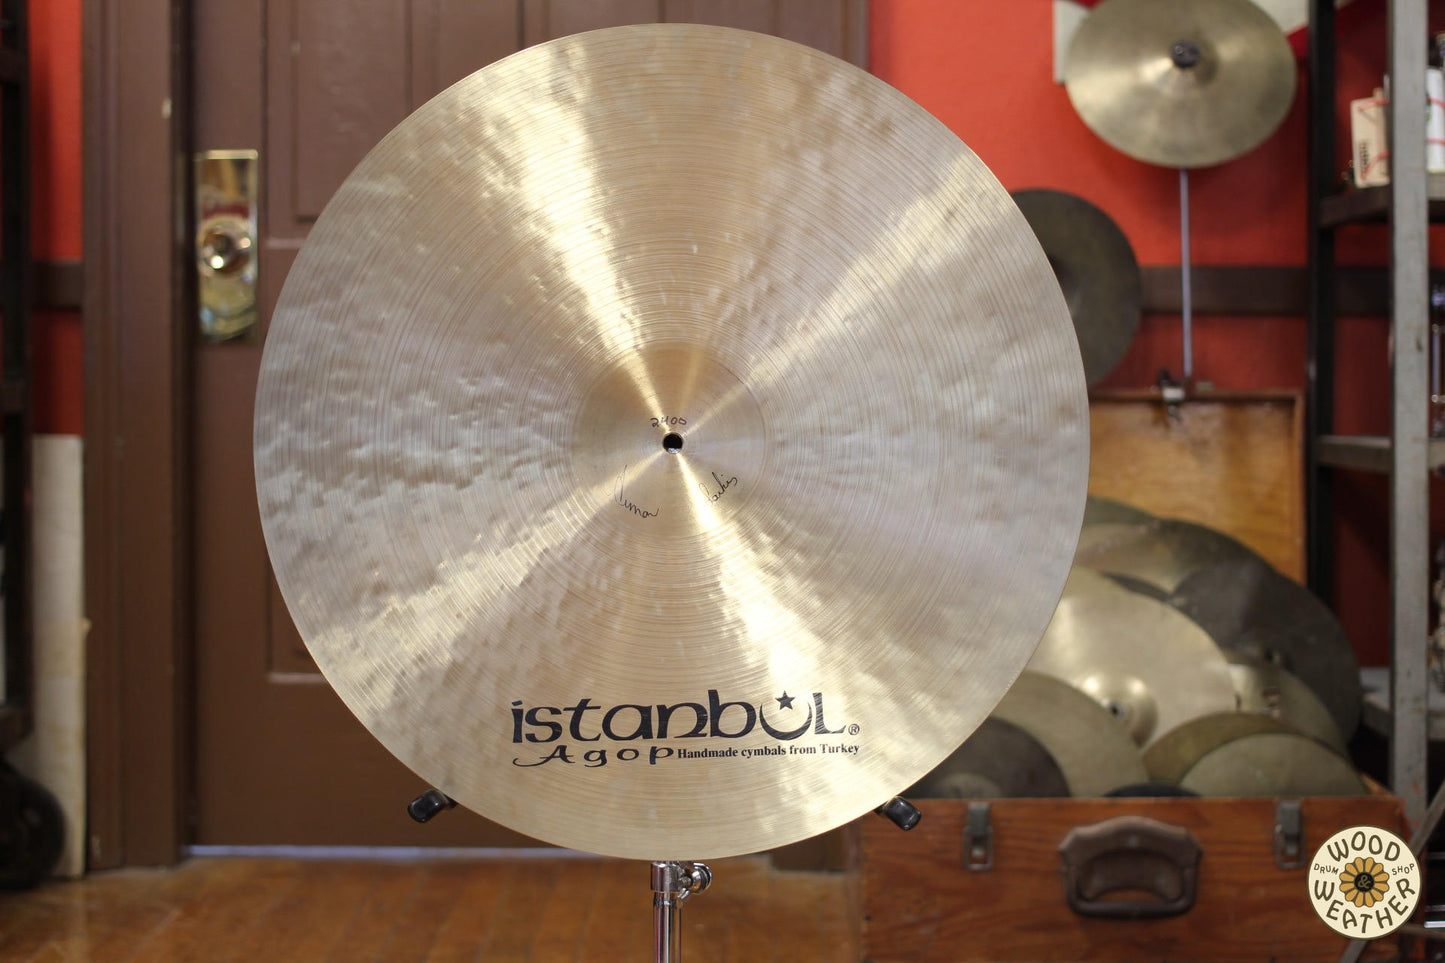 USED Istanbul Agop 22" Mel Lewis Ride Cymbal 2400g